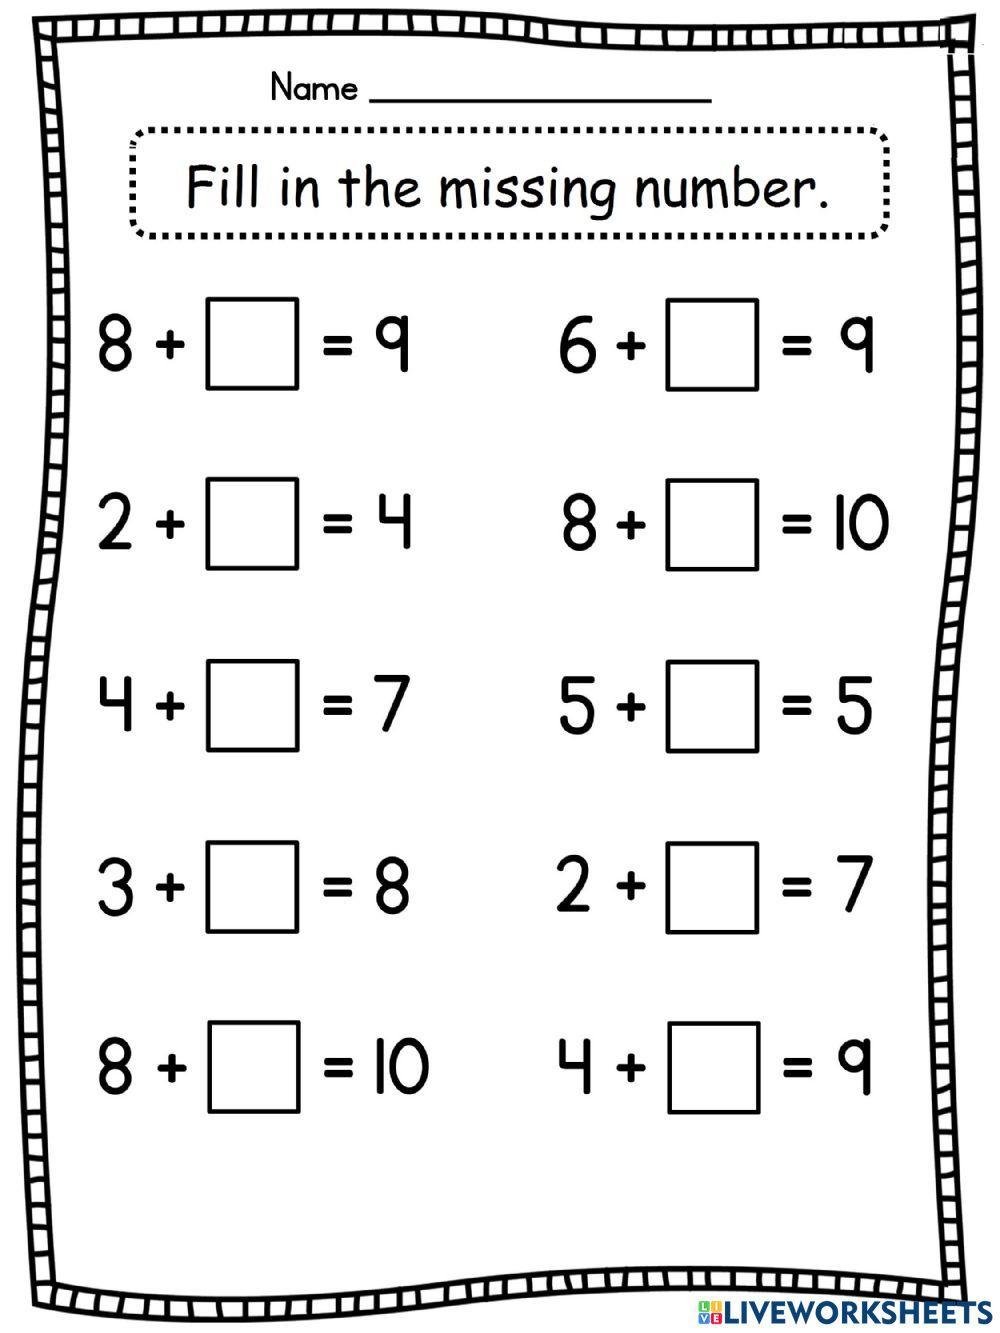 Fill in the missing number - 2